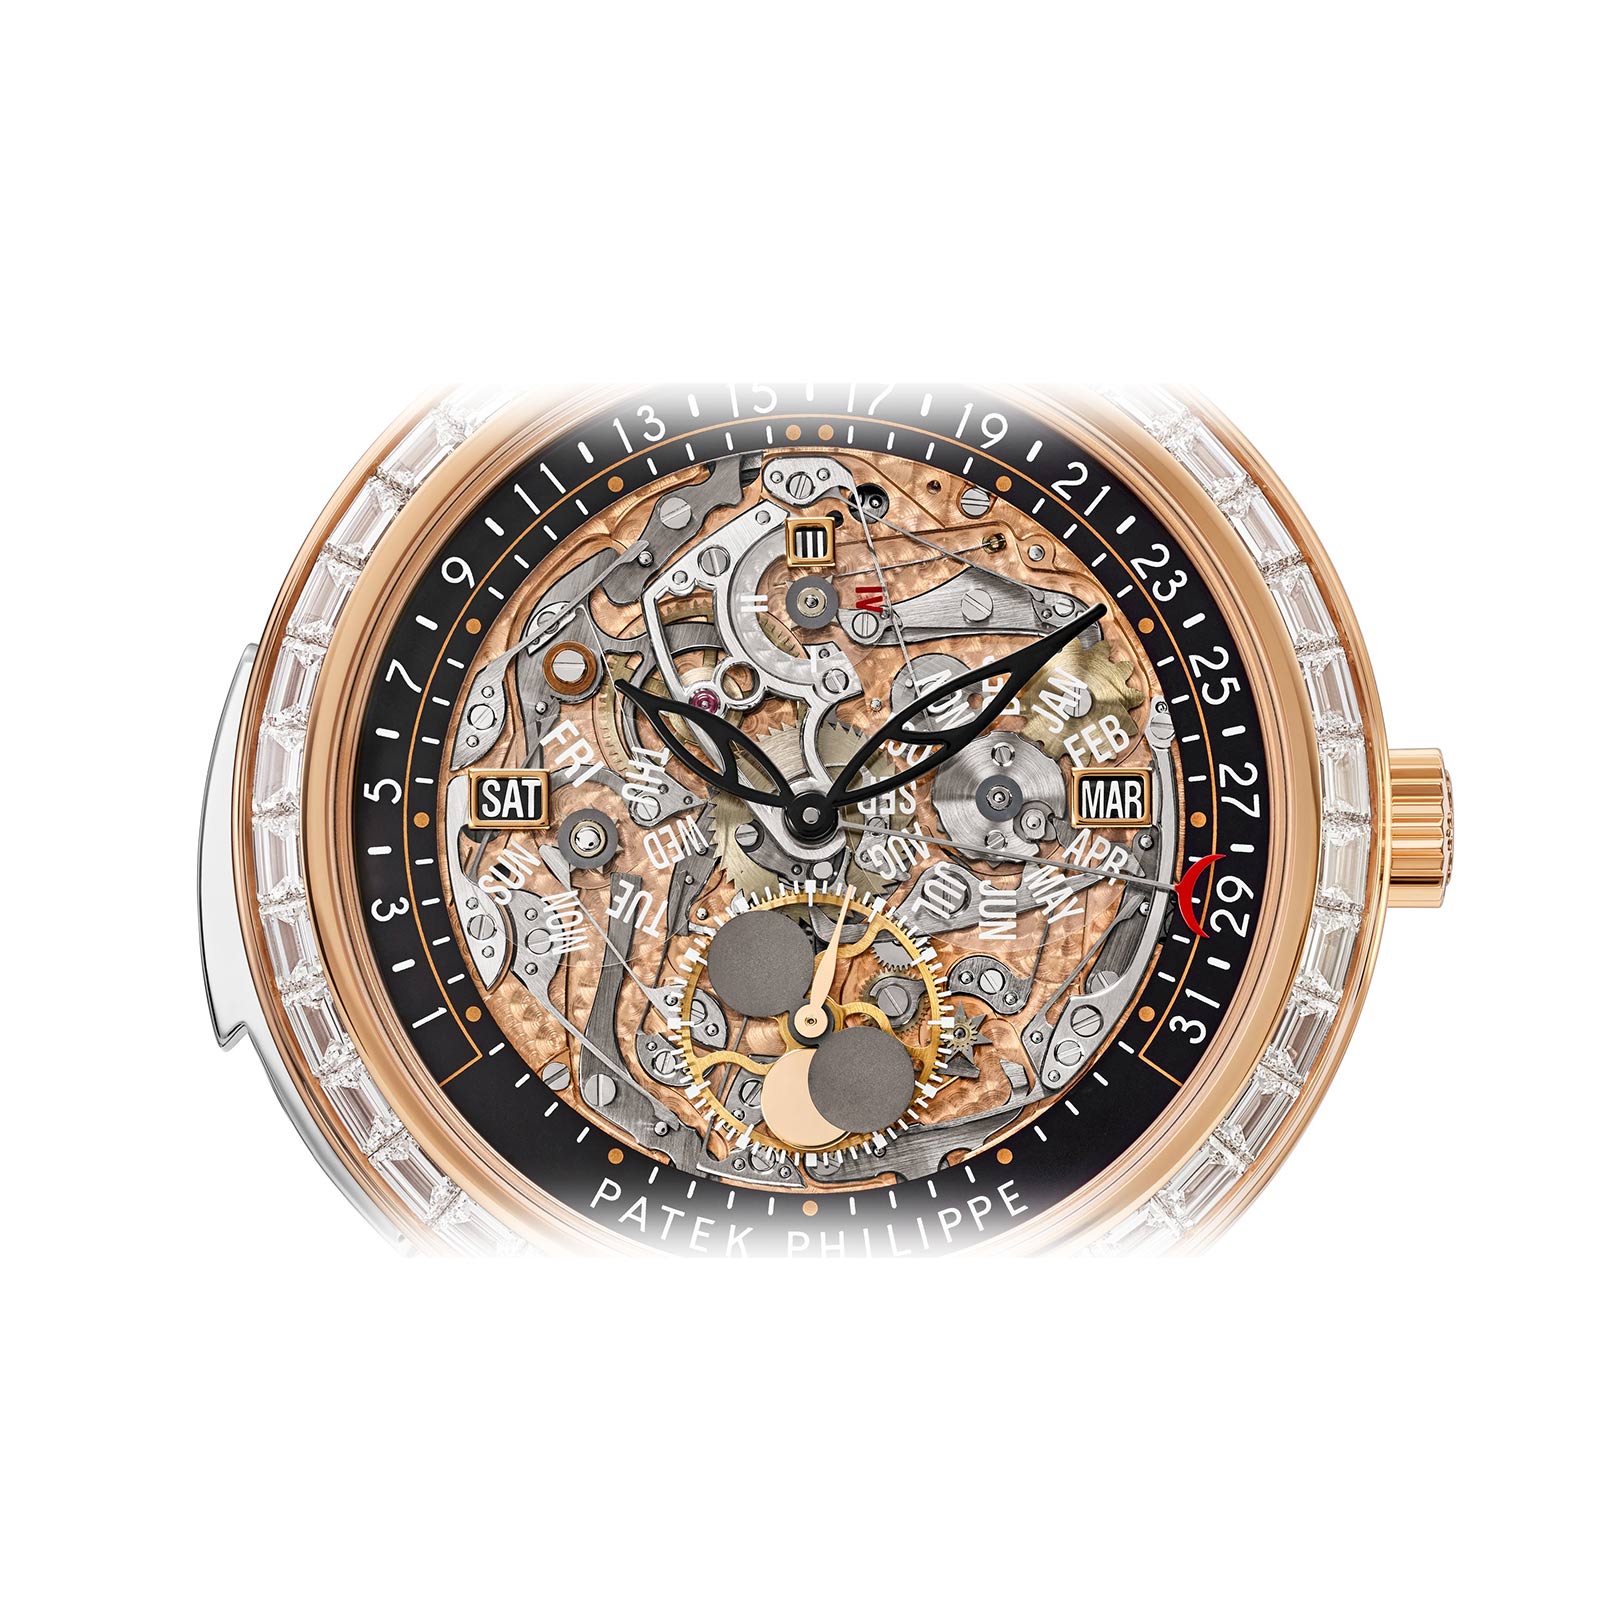 Grand Complications Minute Repeater gallery 9